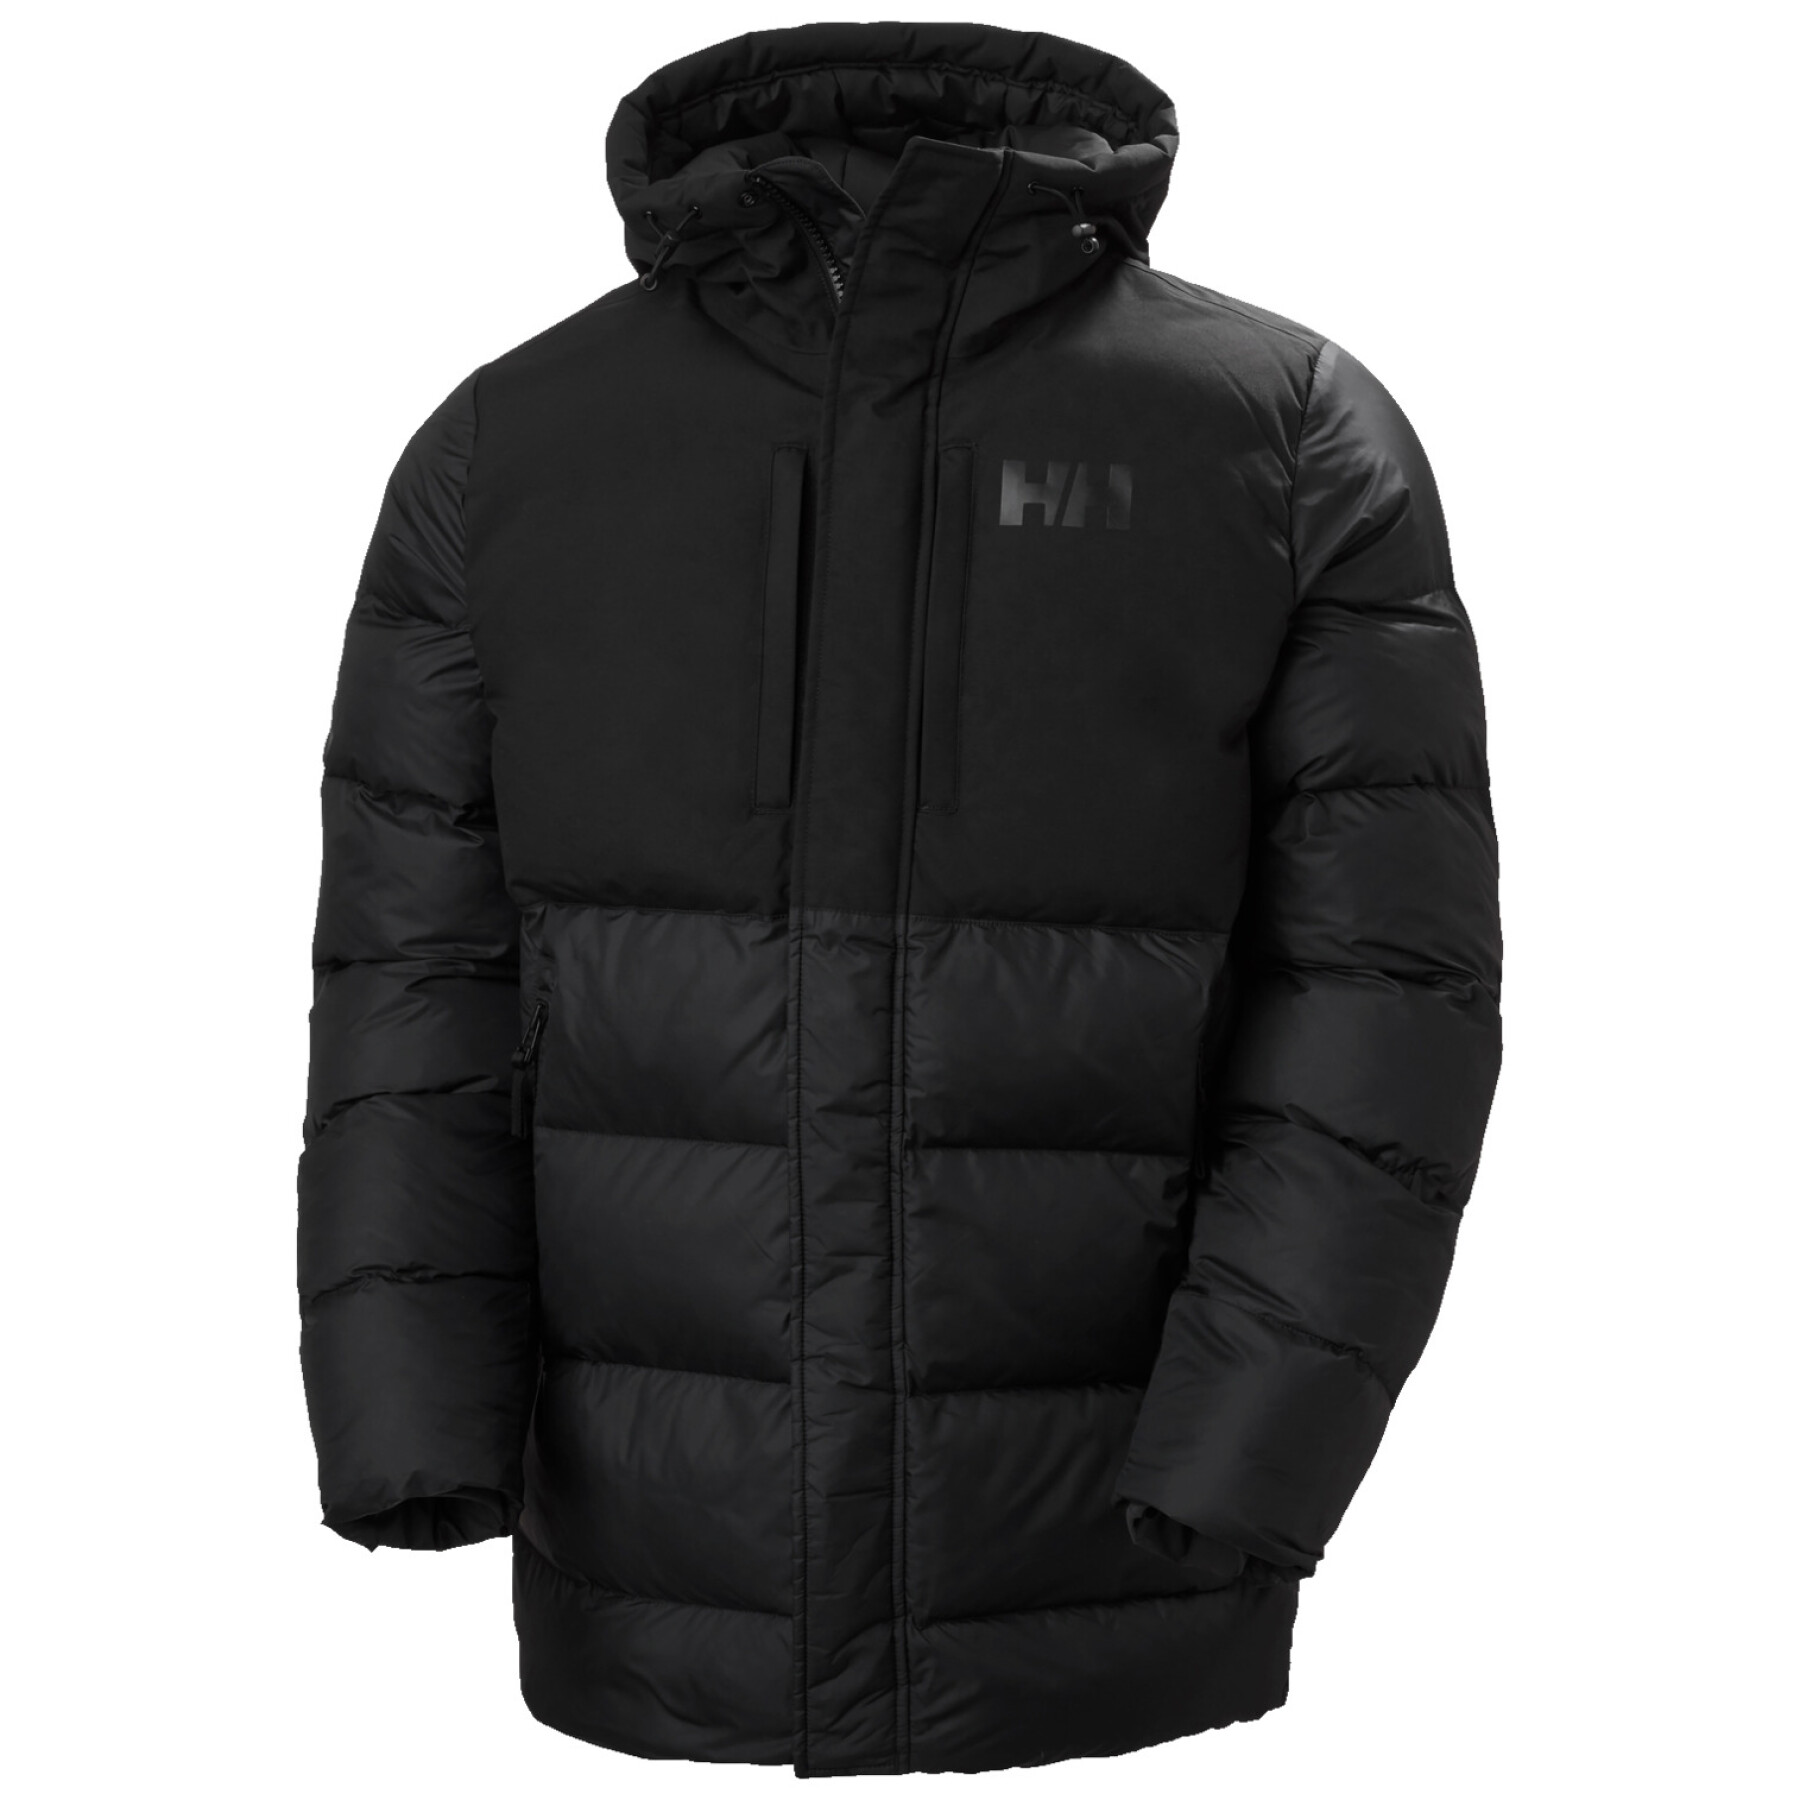 Long jacket Helly Hansen active puffy